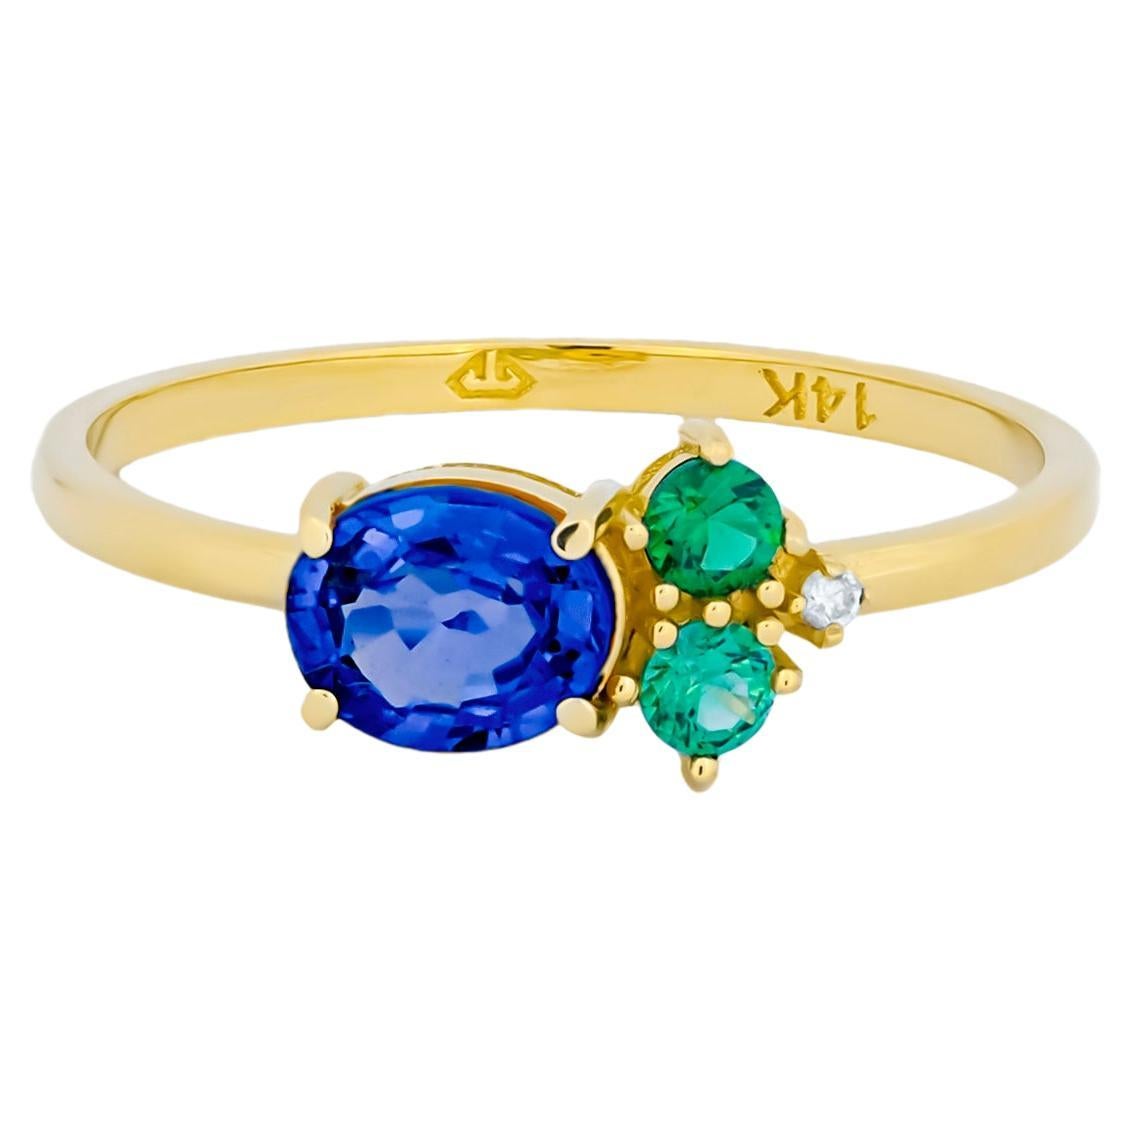 Oval sapphire, tsavorite and diamonds 14k gold ring. For Sale